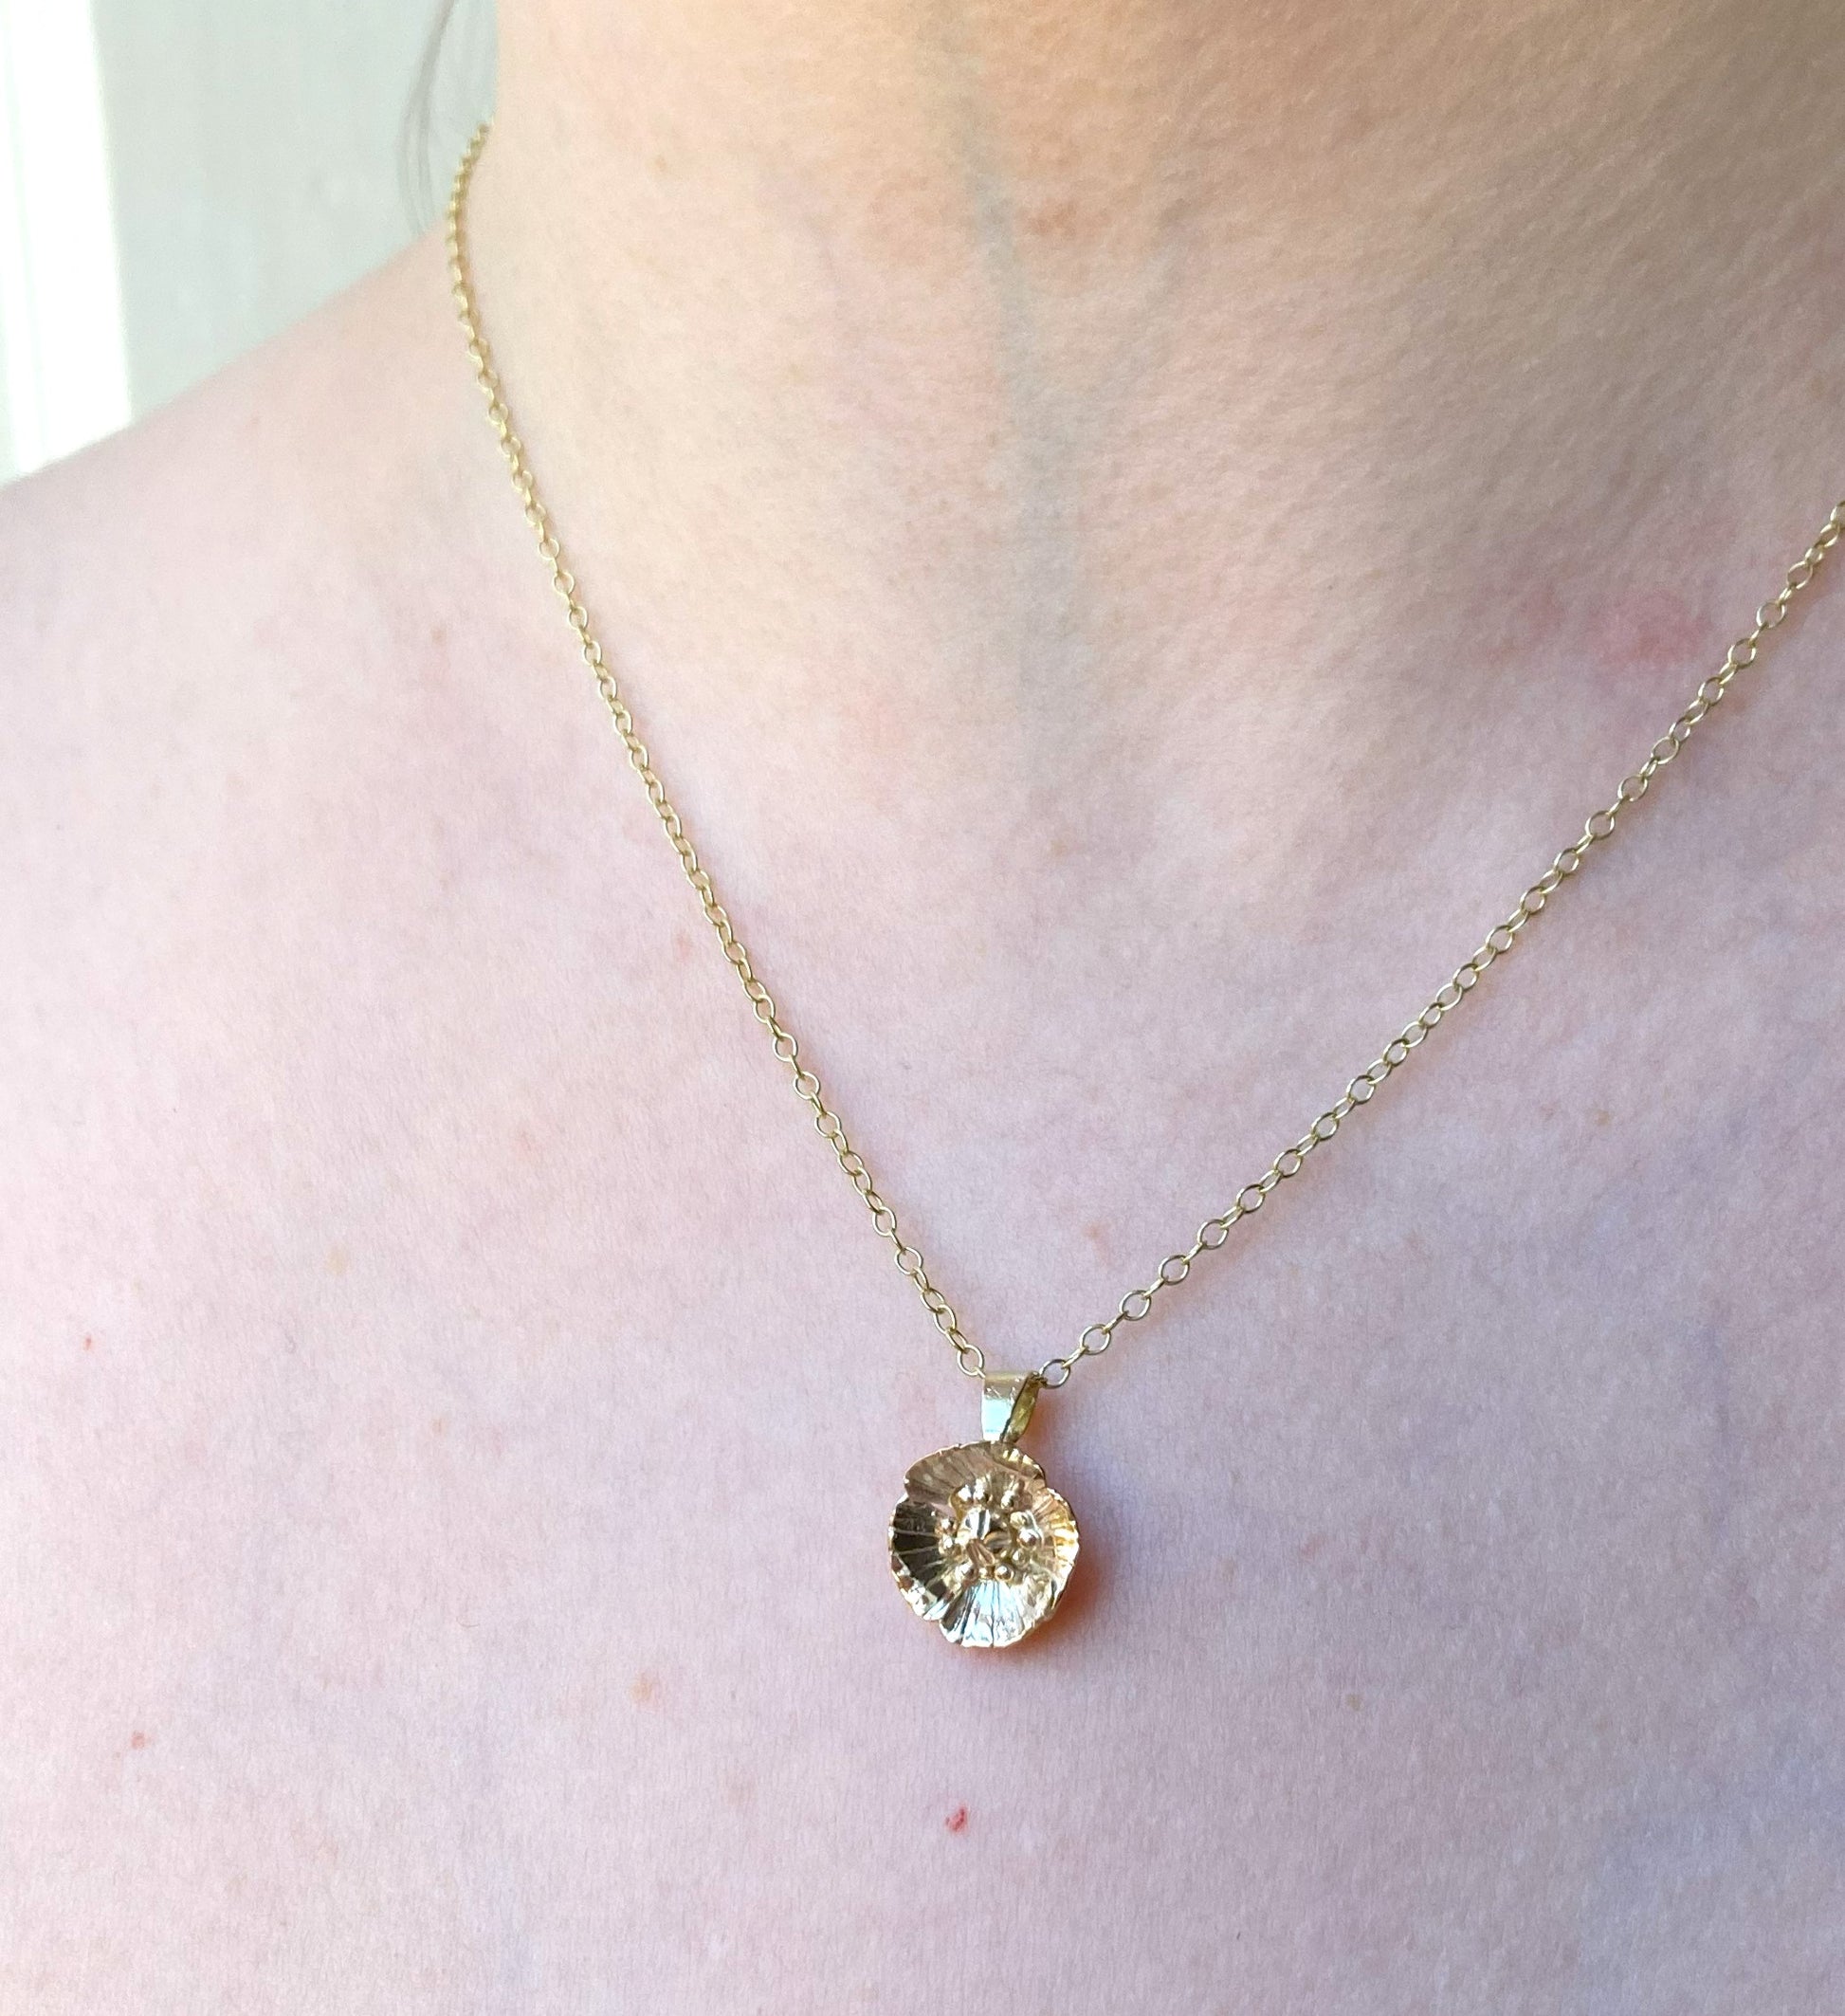 Hand forged yellow gold poppy pendant and chain on woman's neck